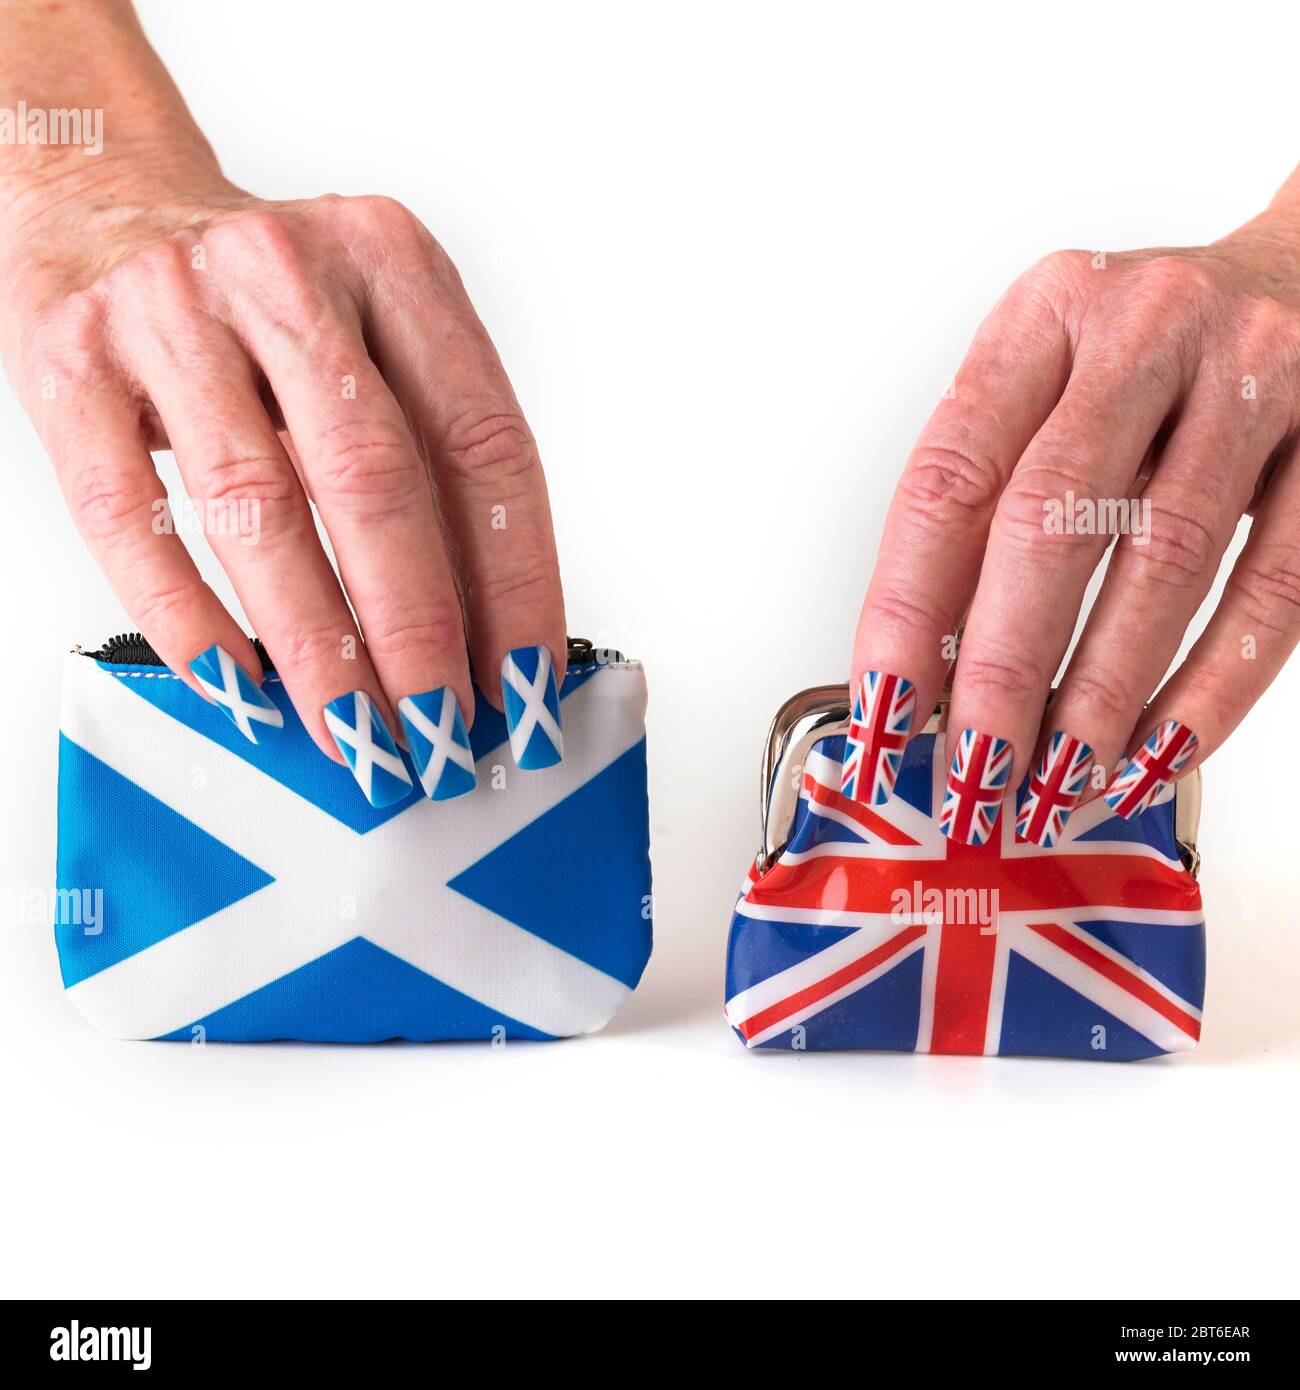 Hands wearing Saltire and Union flag false nails Stock Photo